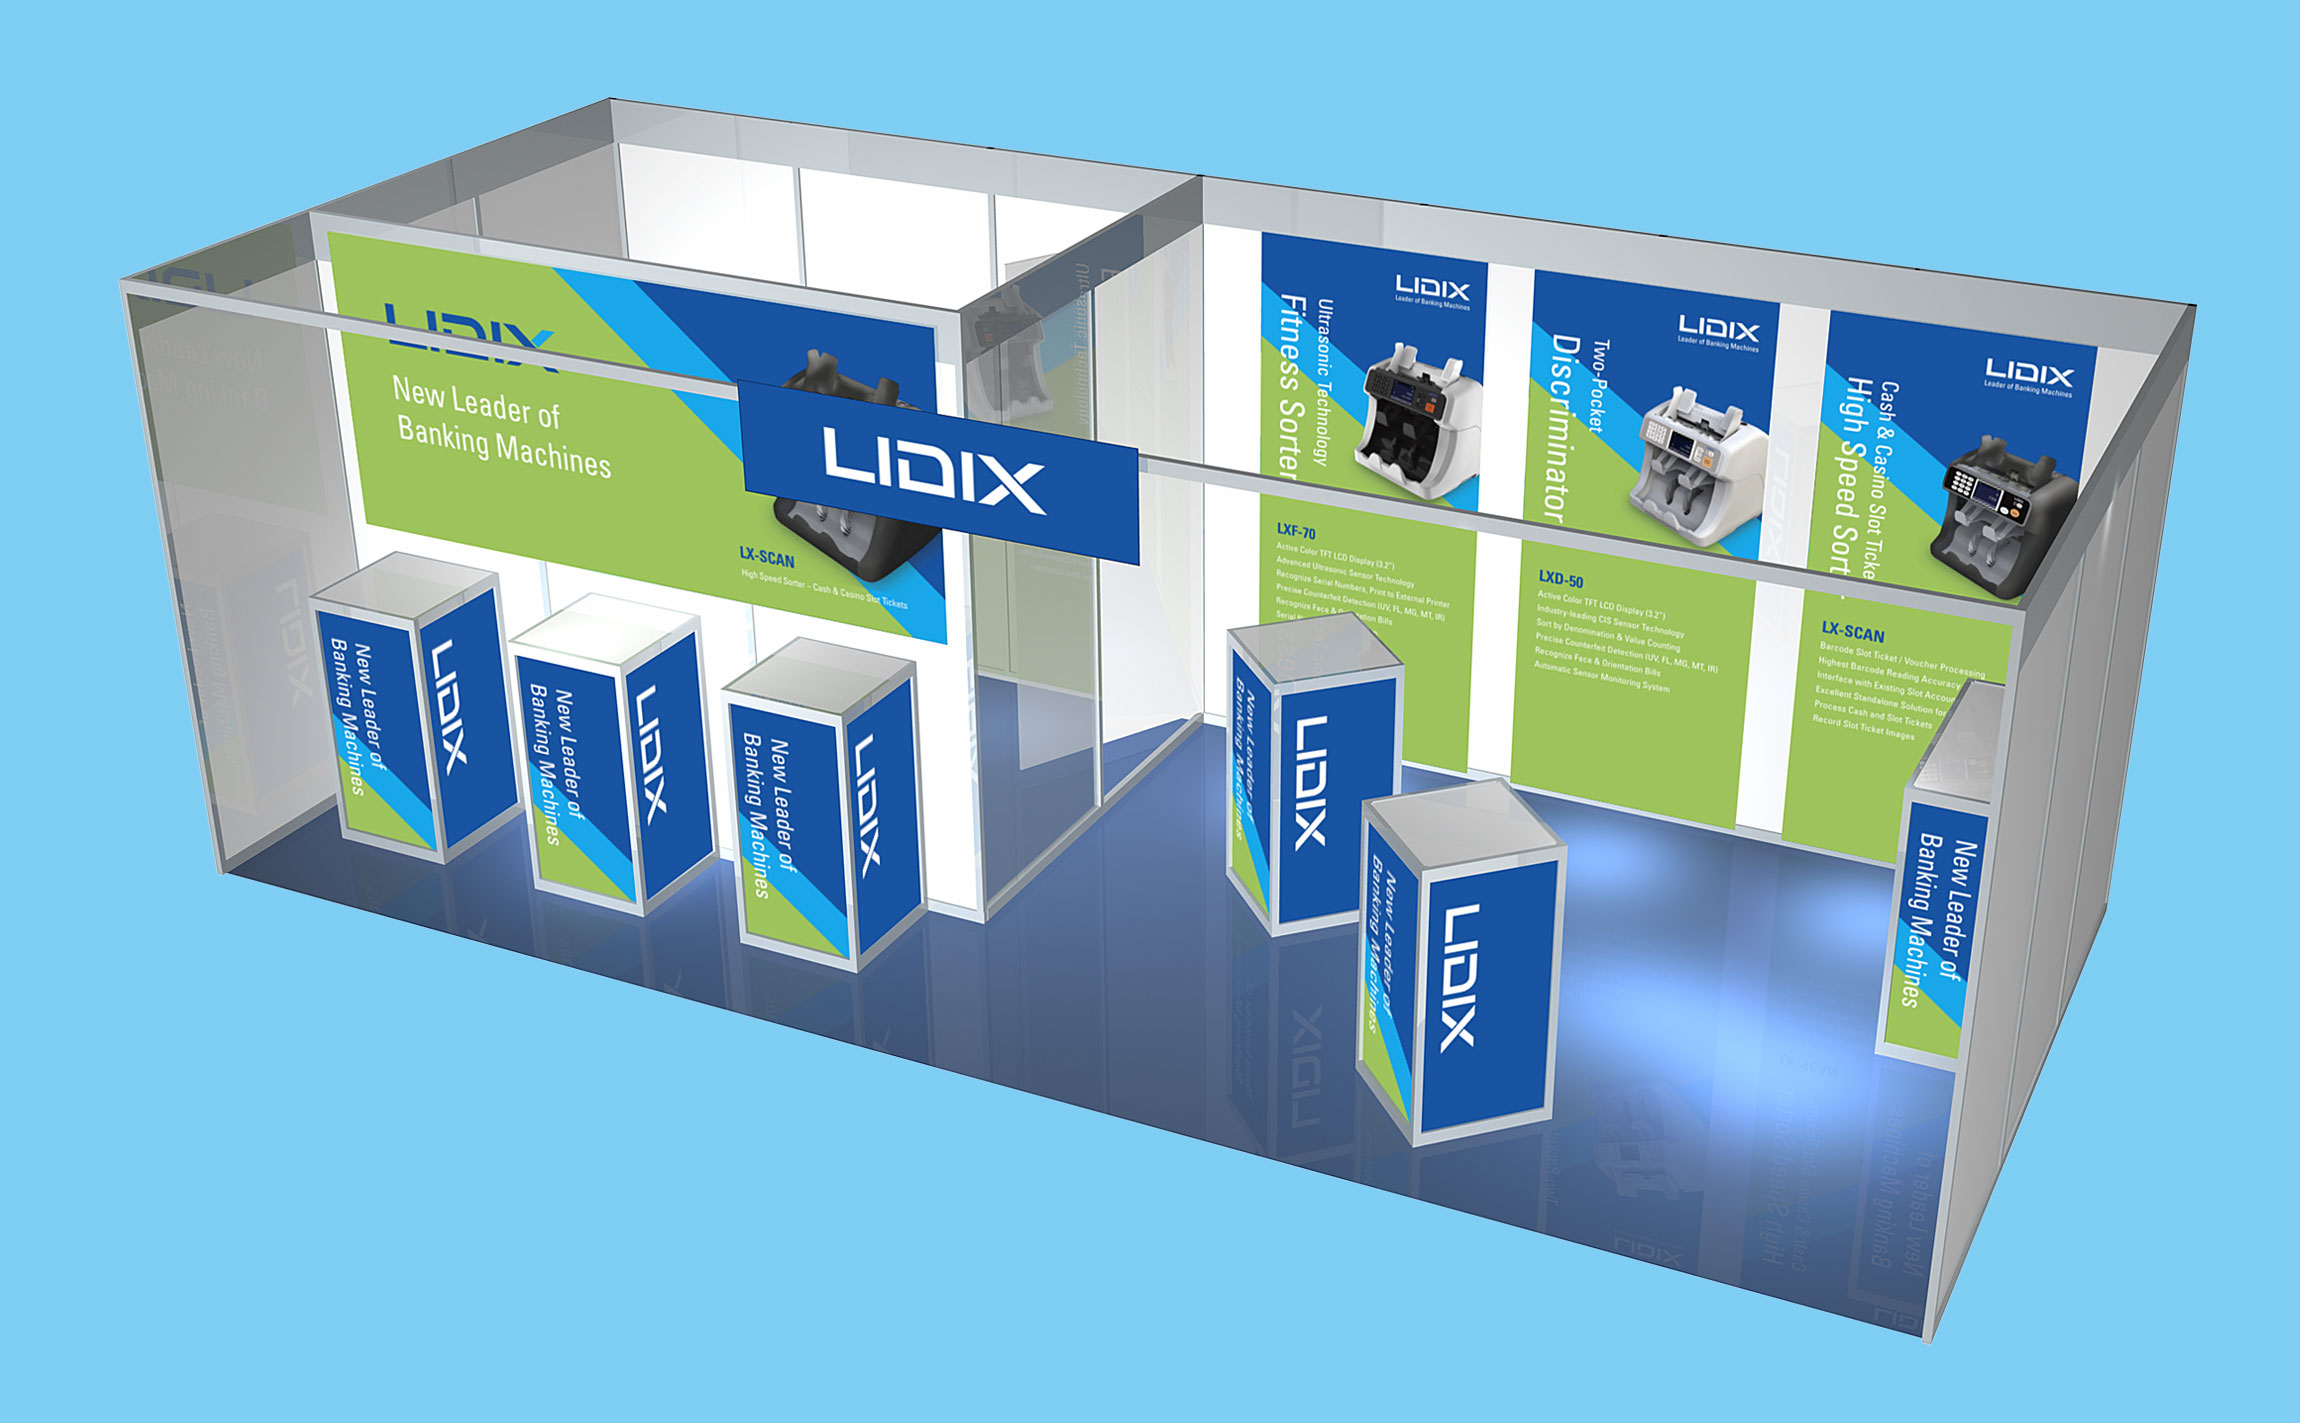 Exbition Booth for Lidix at CeBIT